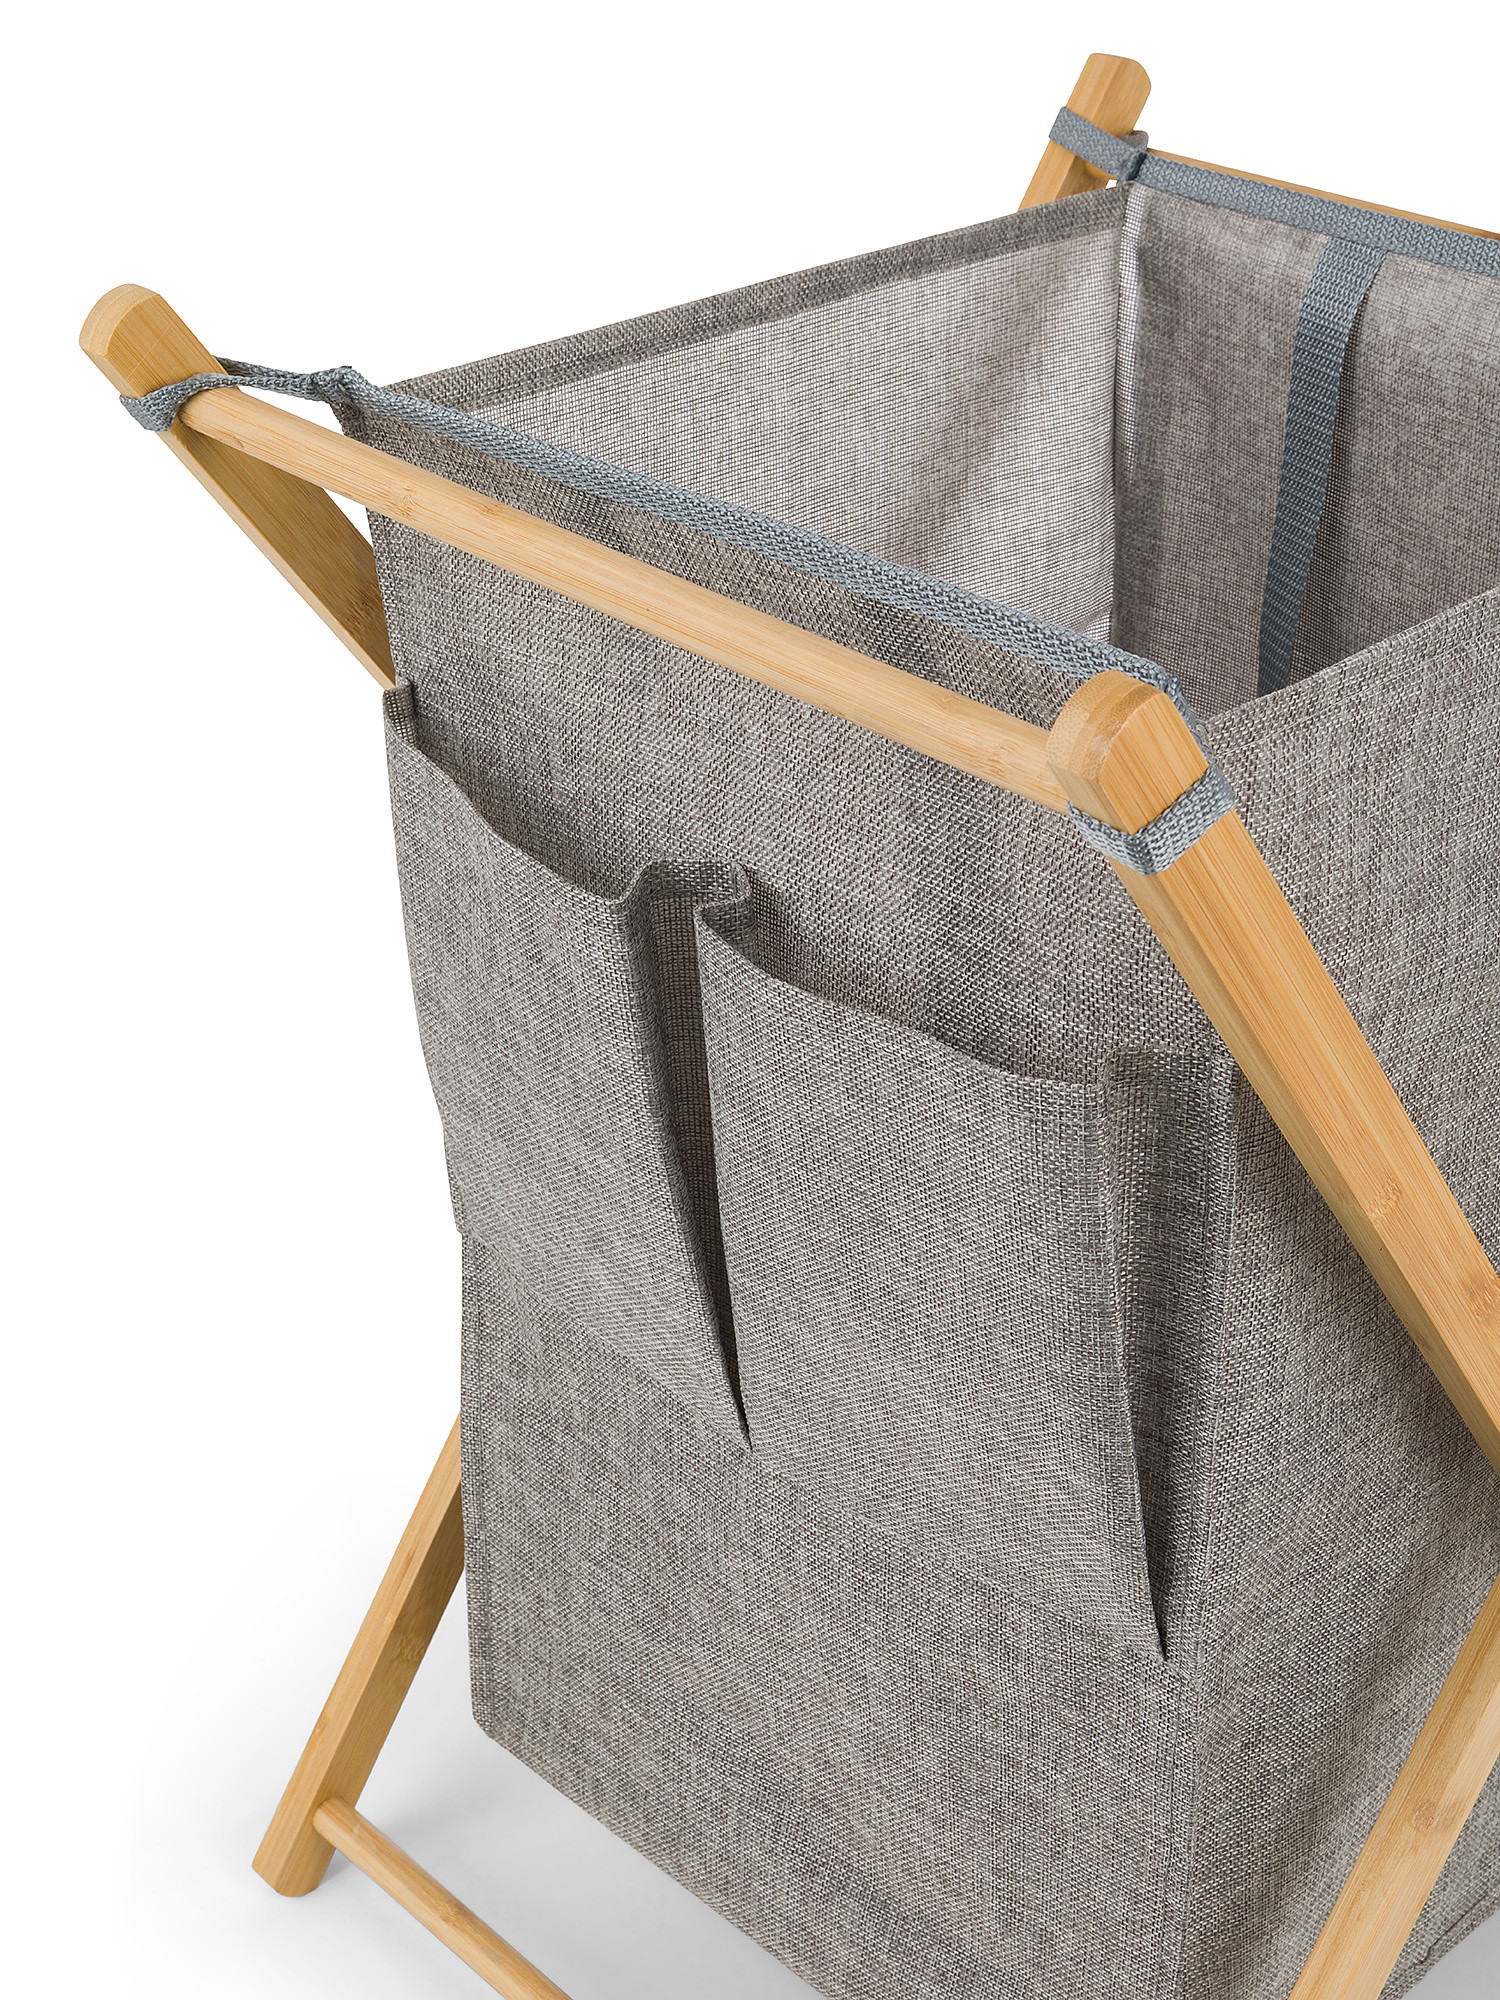 Woven and bamboo laundry basket, Grey, large image number 1